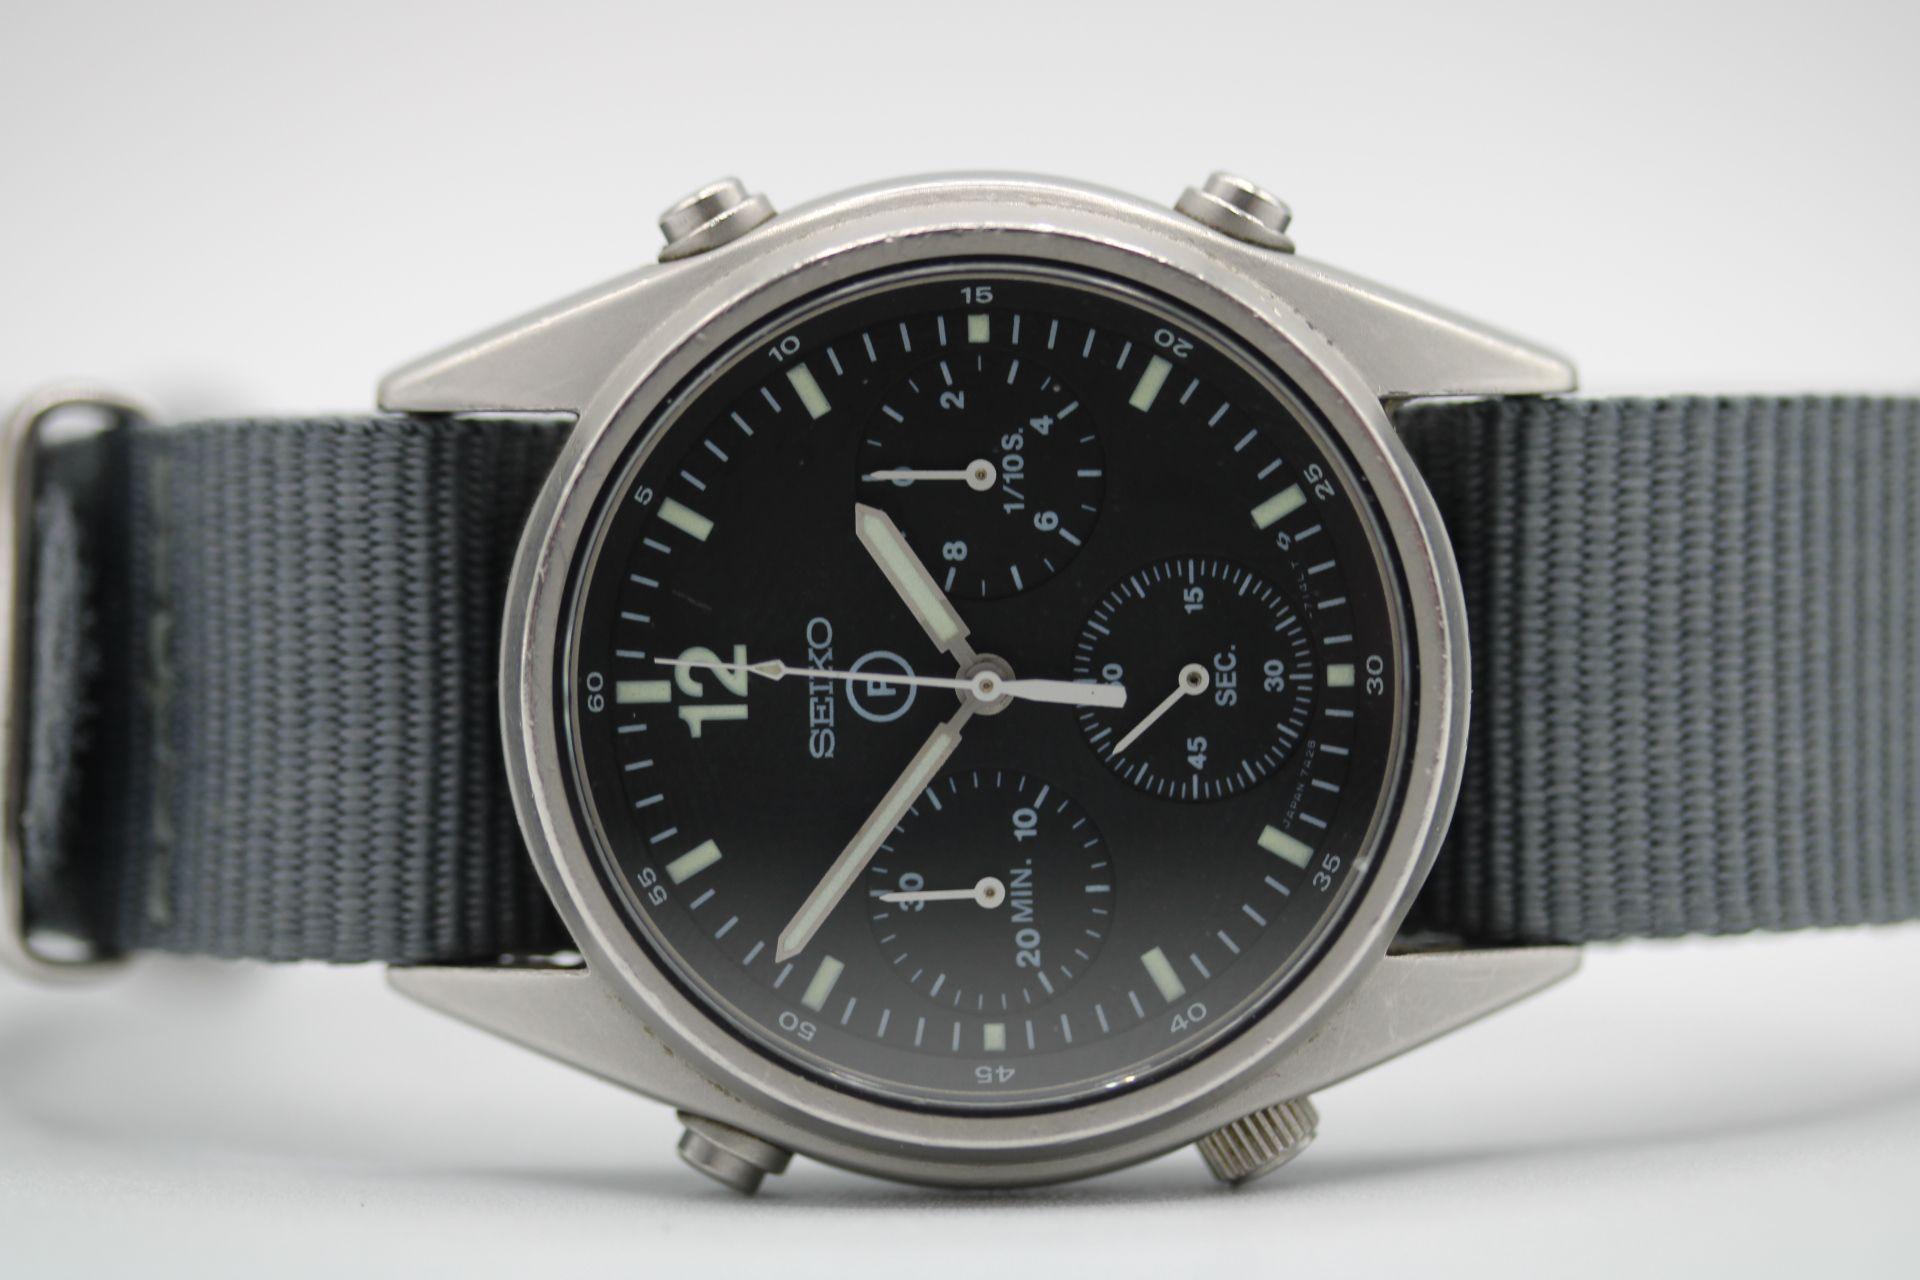 Seiko Chronograph Gen 1 Military Raf Chronograph 1990 In Good Condition For Sale In London, GB